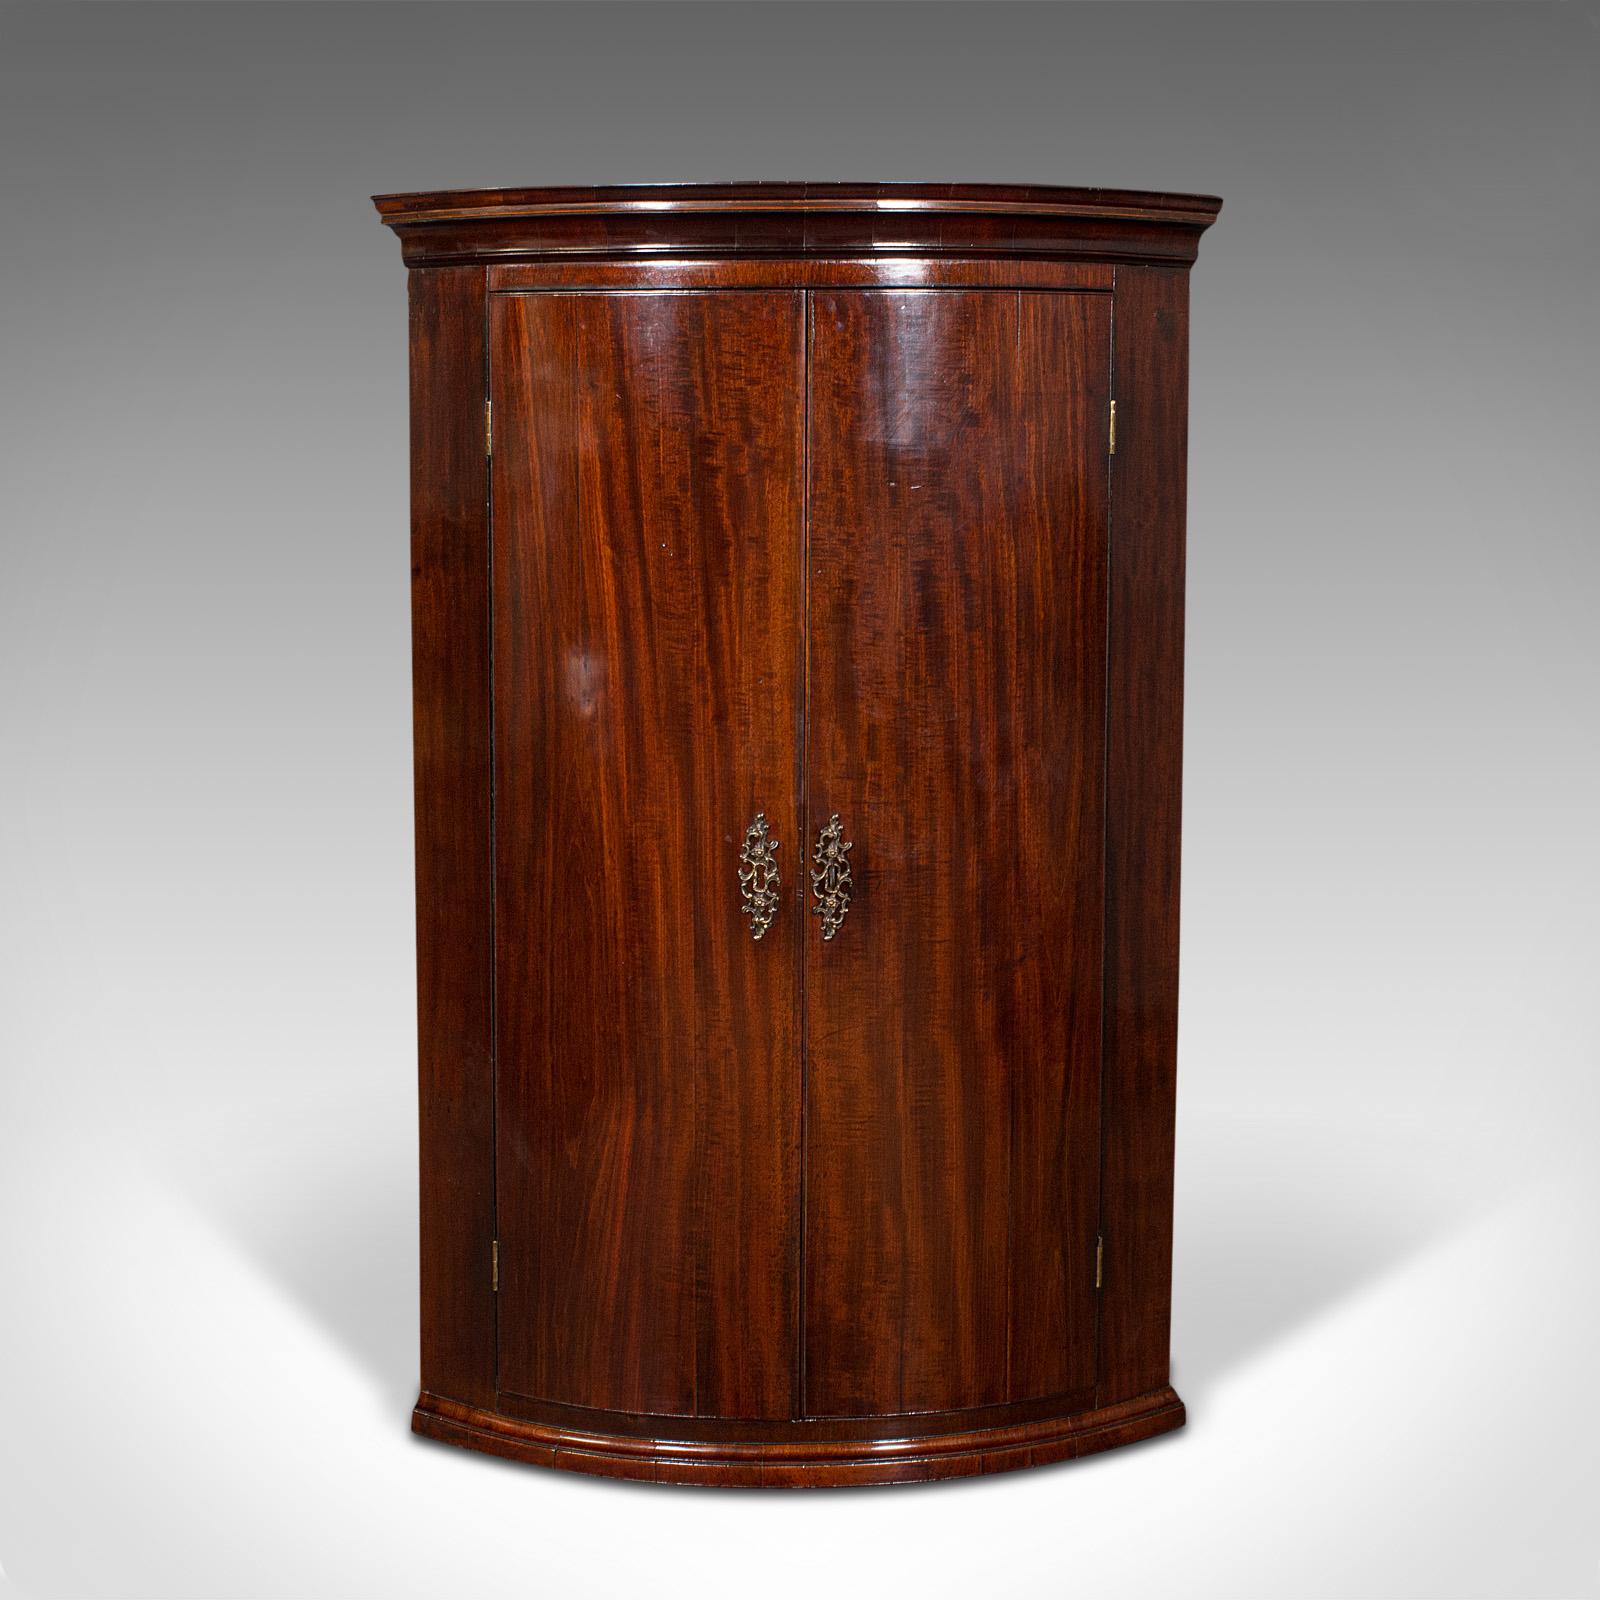 This is an antique corner cabinet. An English, mahogany bow front hanging cupboard, dating to the Georgian period, circa 1780.

Presents beautifully with delightful bow front form
Displays a desirable aged patina and in good order
Select stocks